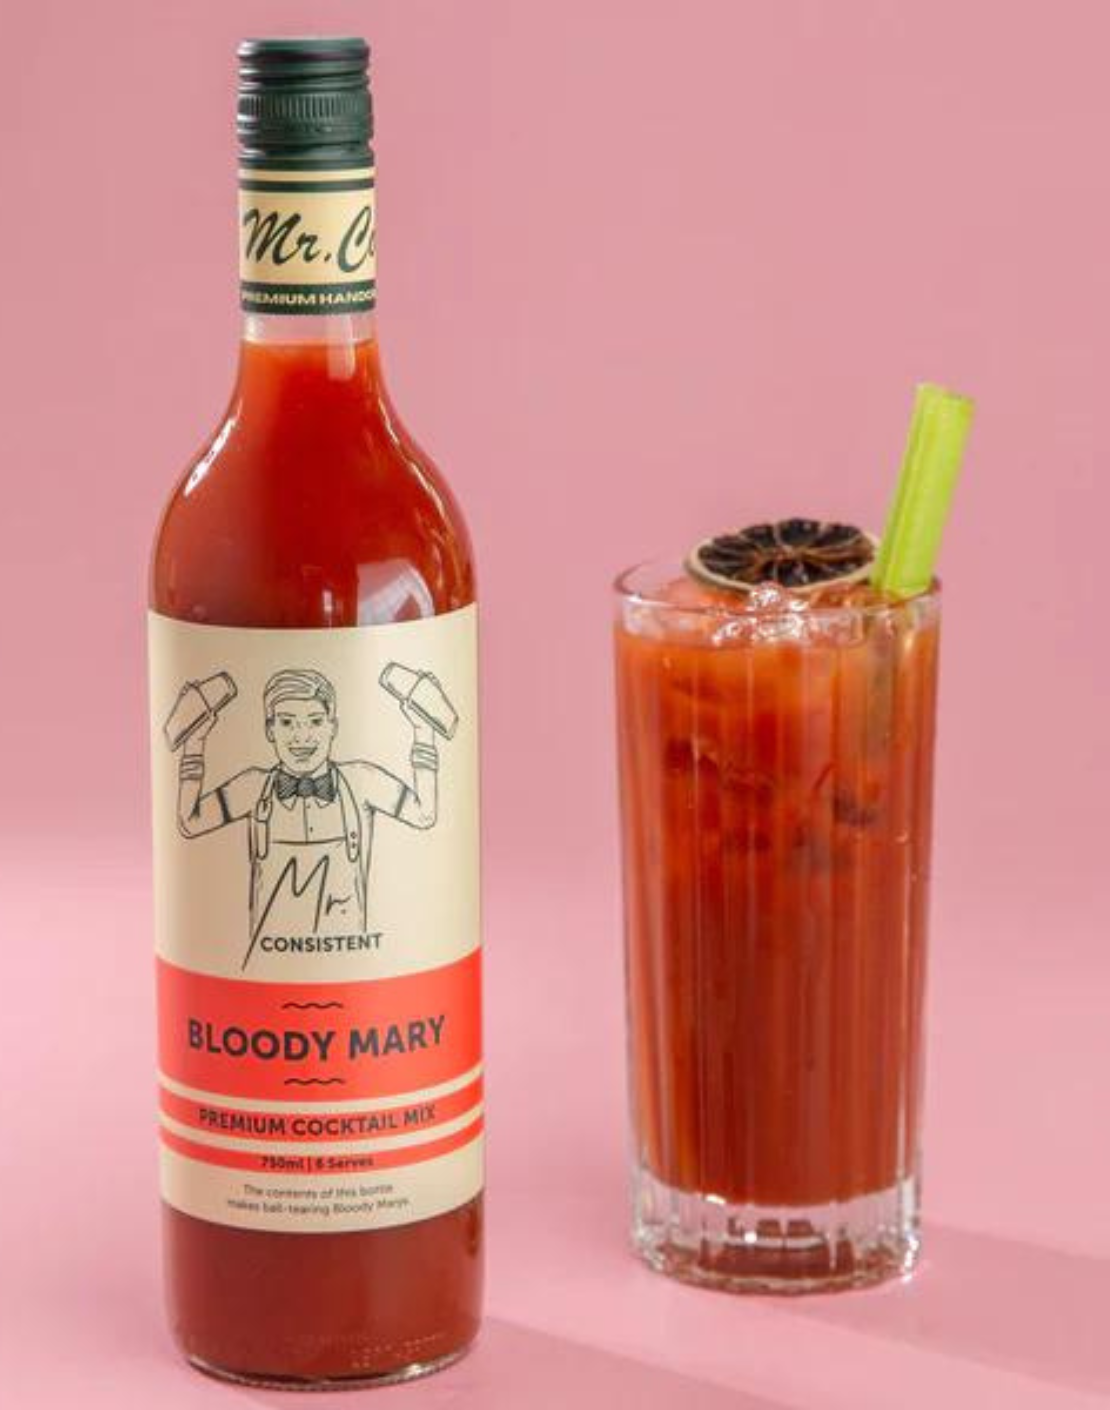 Bloody Mary Premium Cocktail Mix